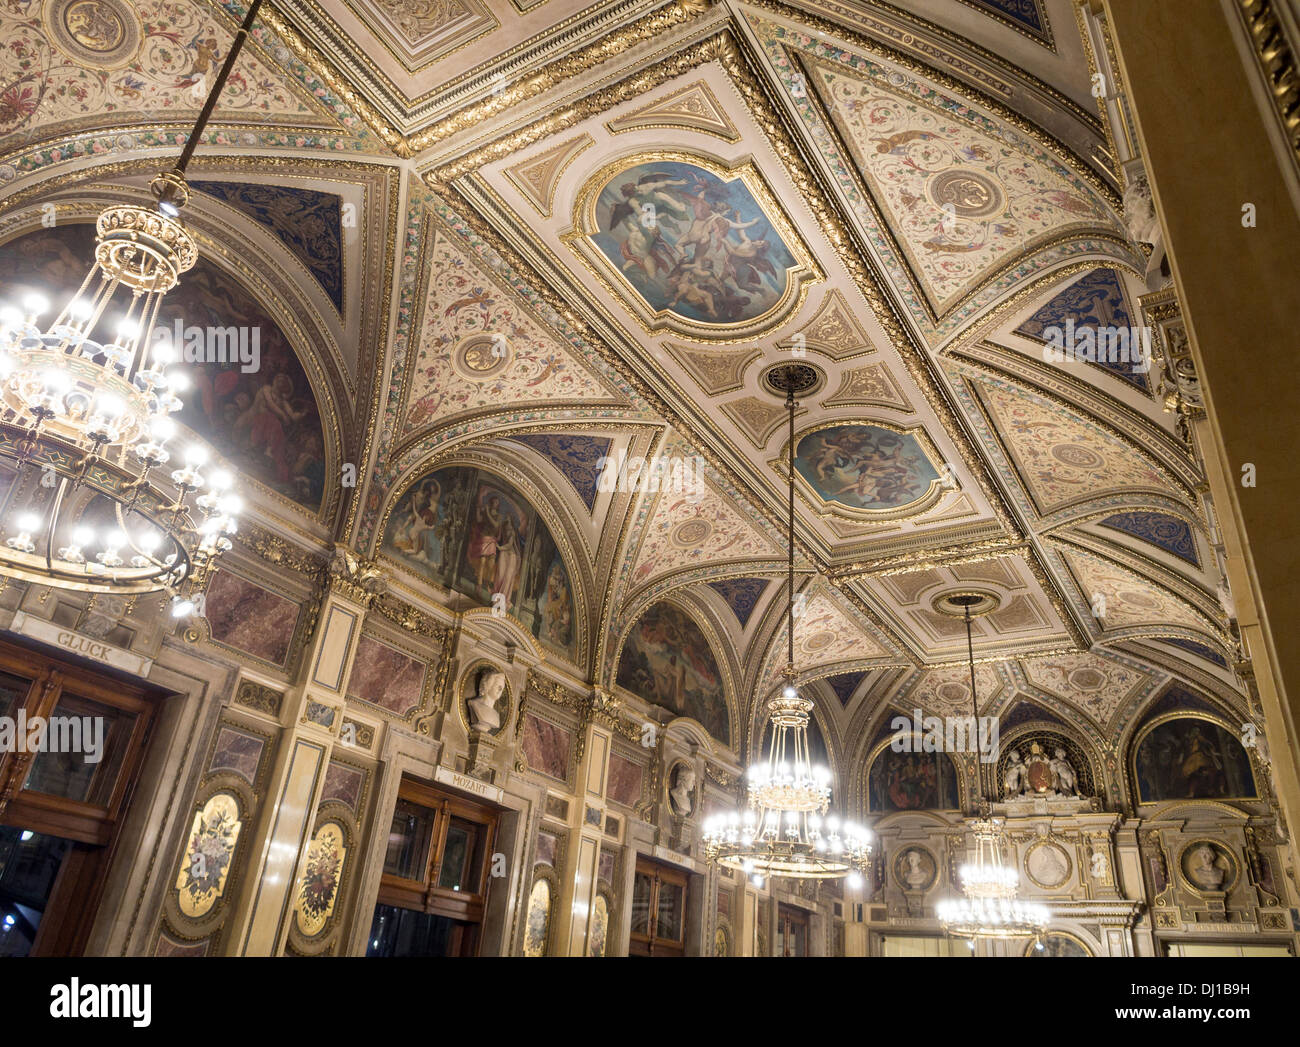 Ceiling in one of the side halls at Vienna State Opera. The opulent decoration of a ceiling in Vienna's famous Opera House. Stock Photo